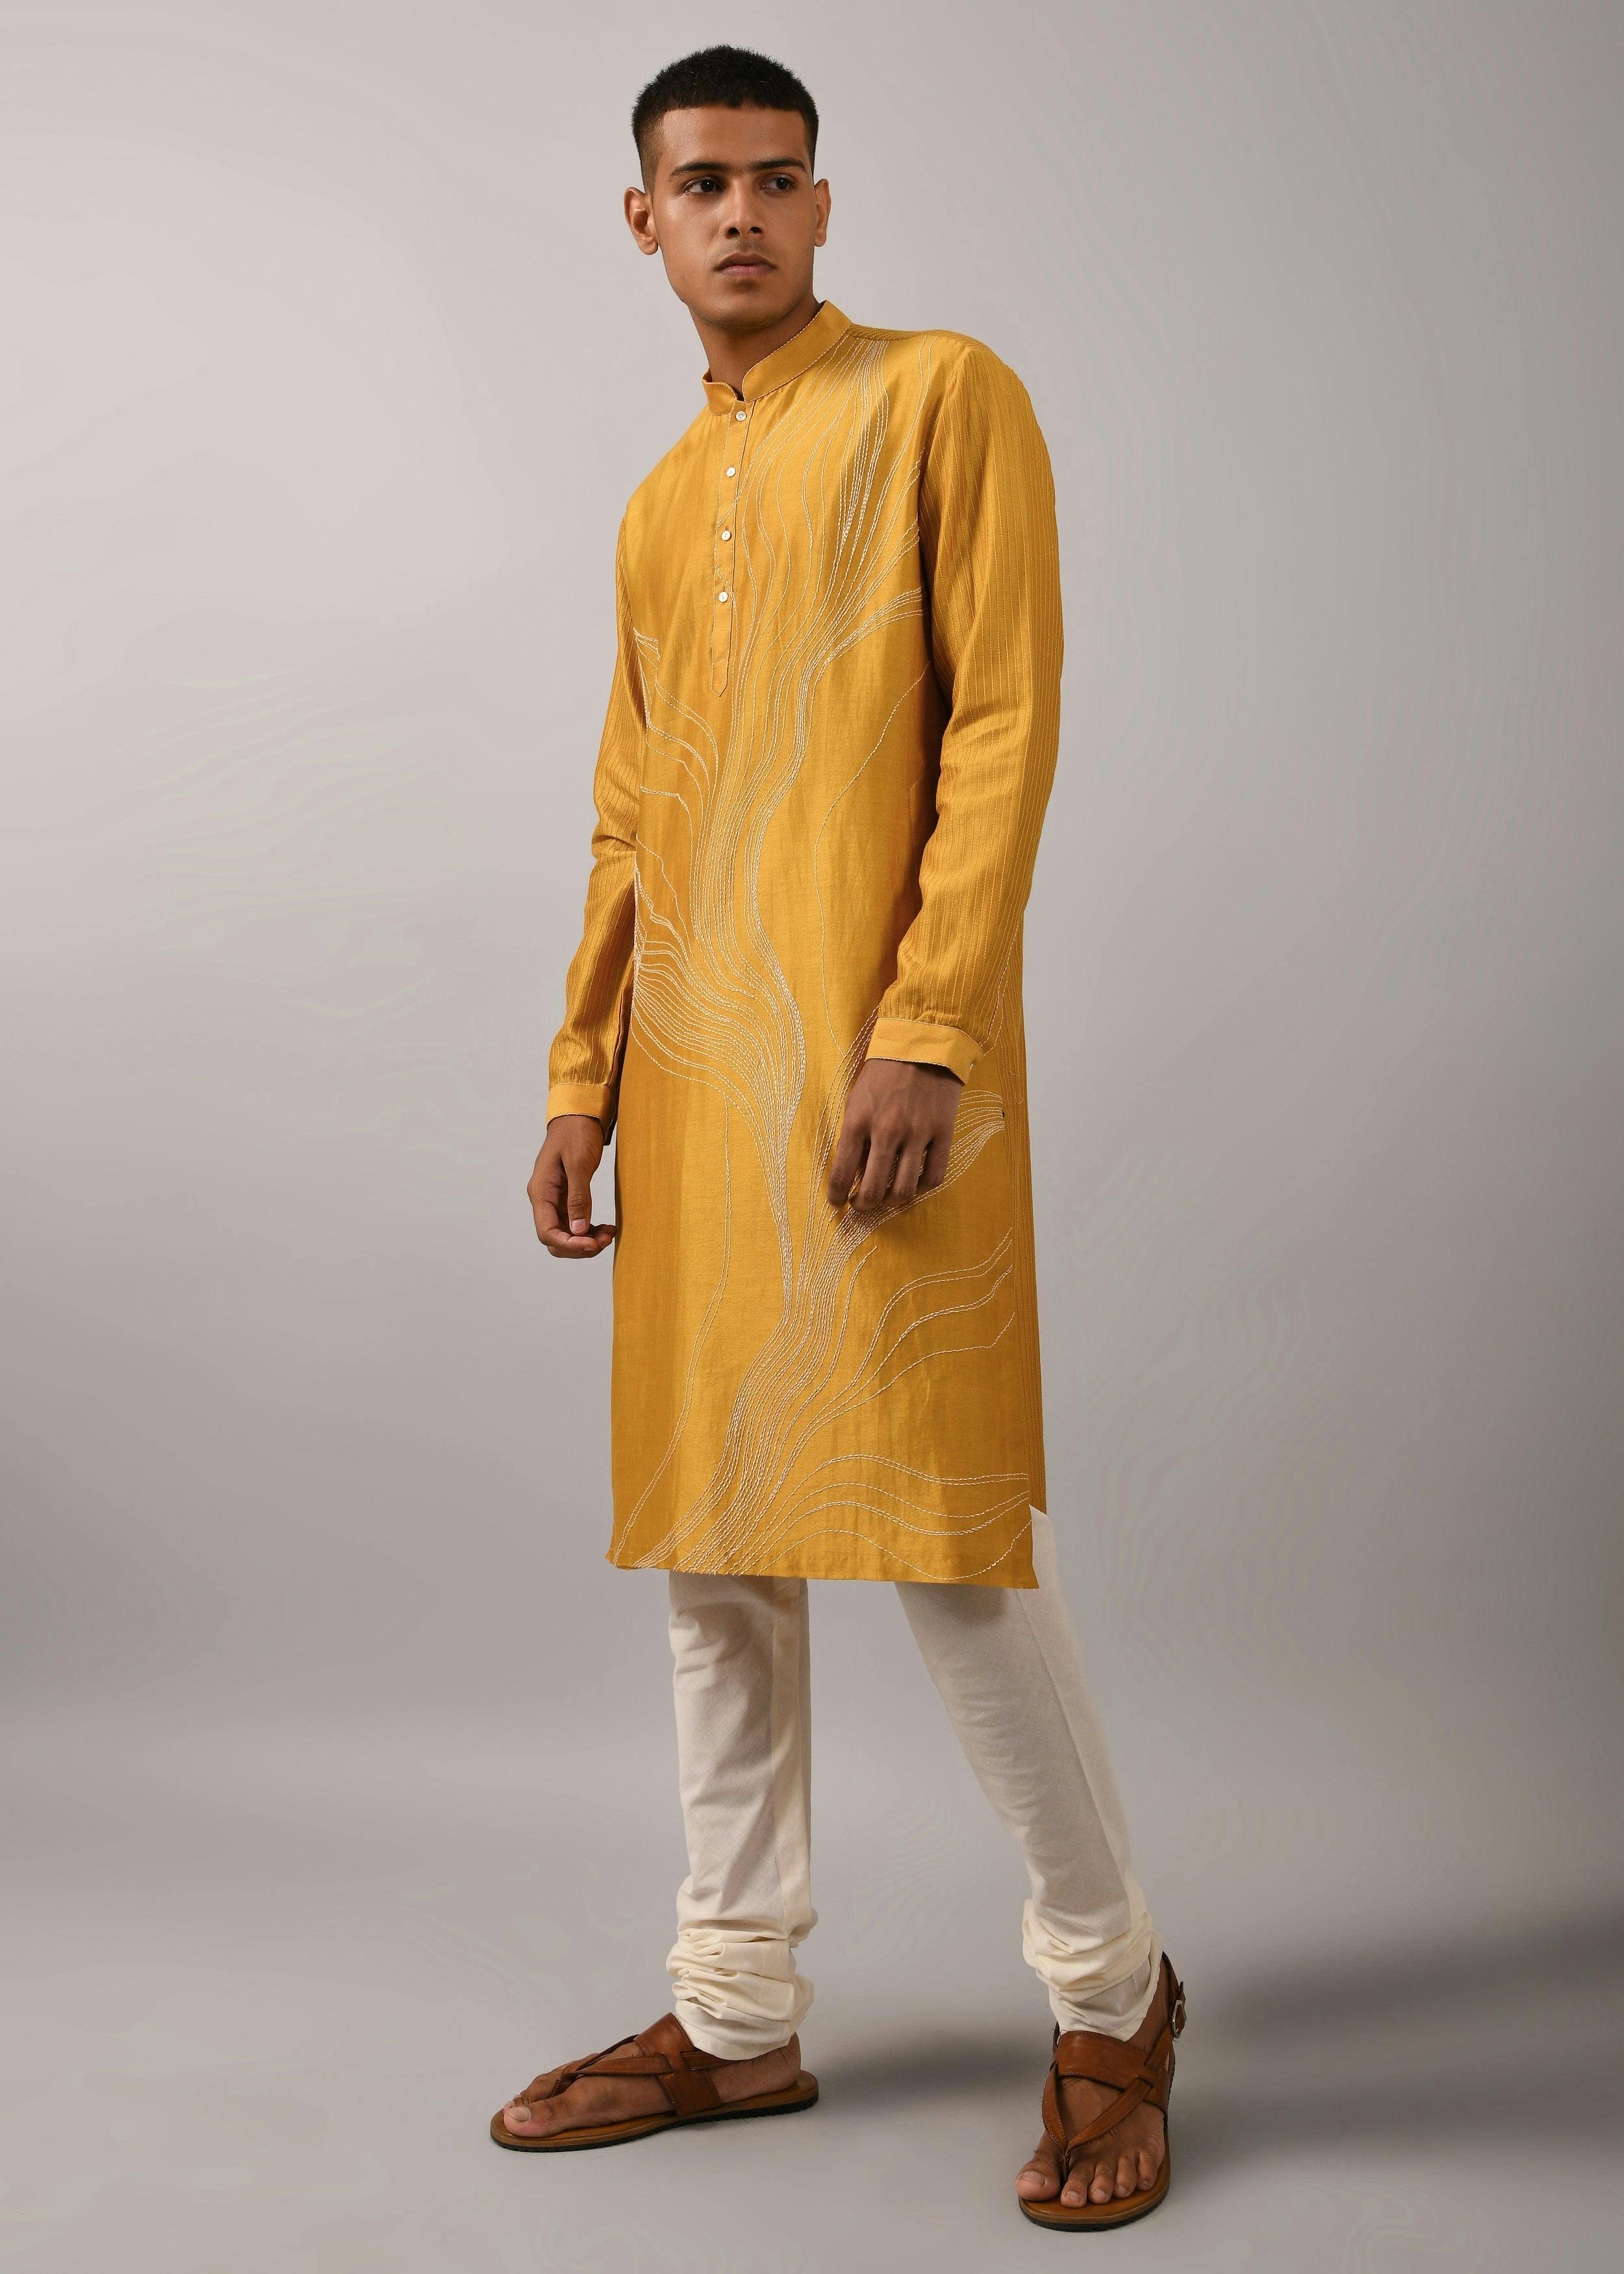 Horizon Hand Embroidered Kurta Set, a product by Country Made